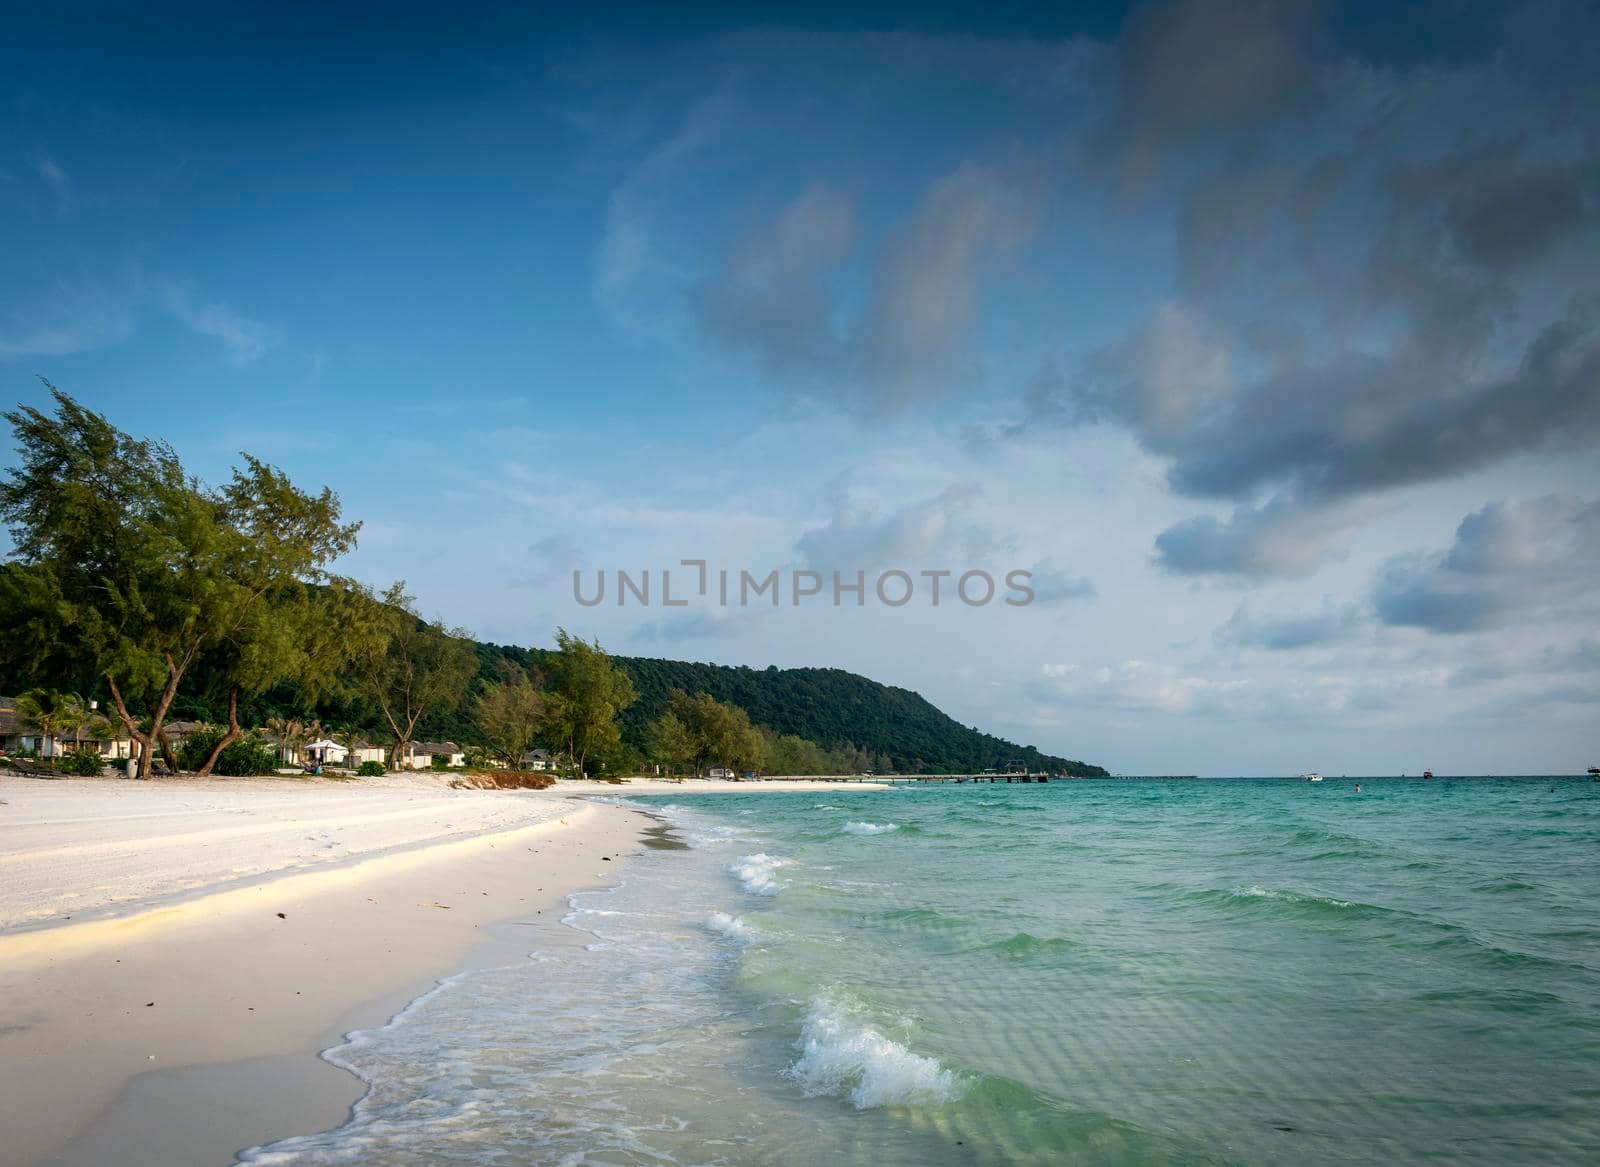 long beach resort area view in tropical paradise koh rong island cambodia